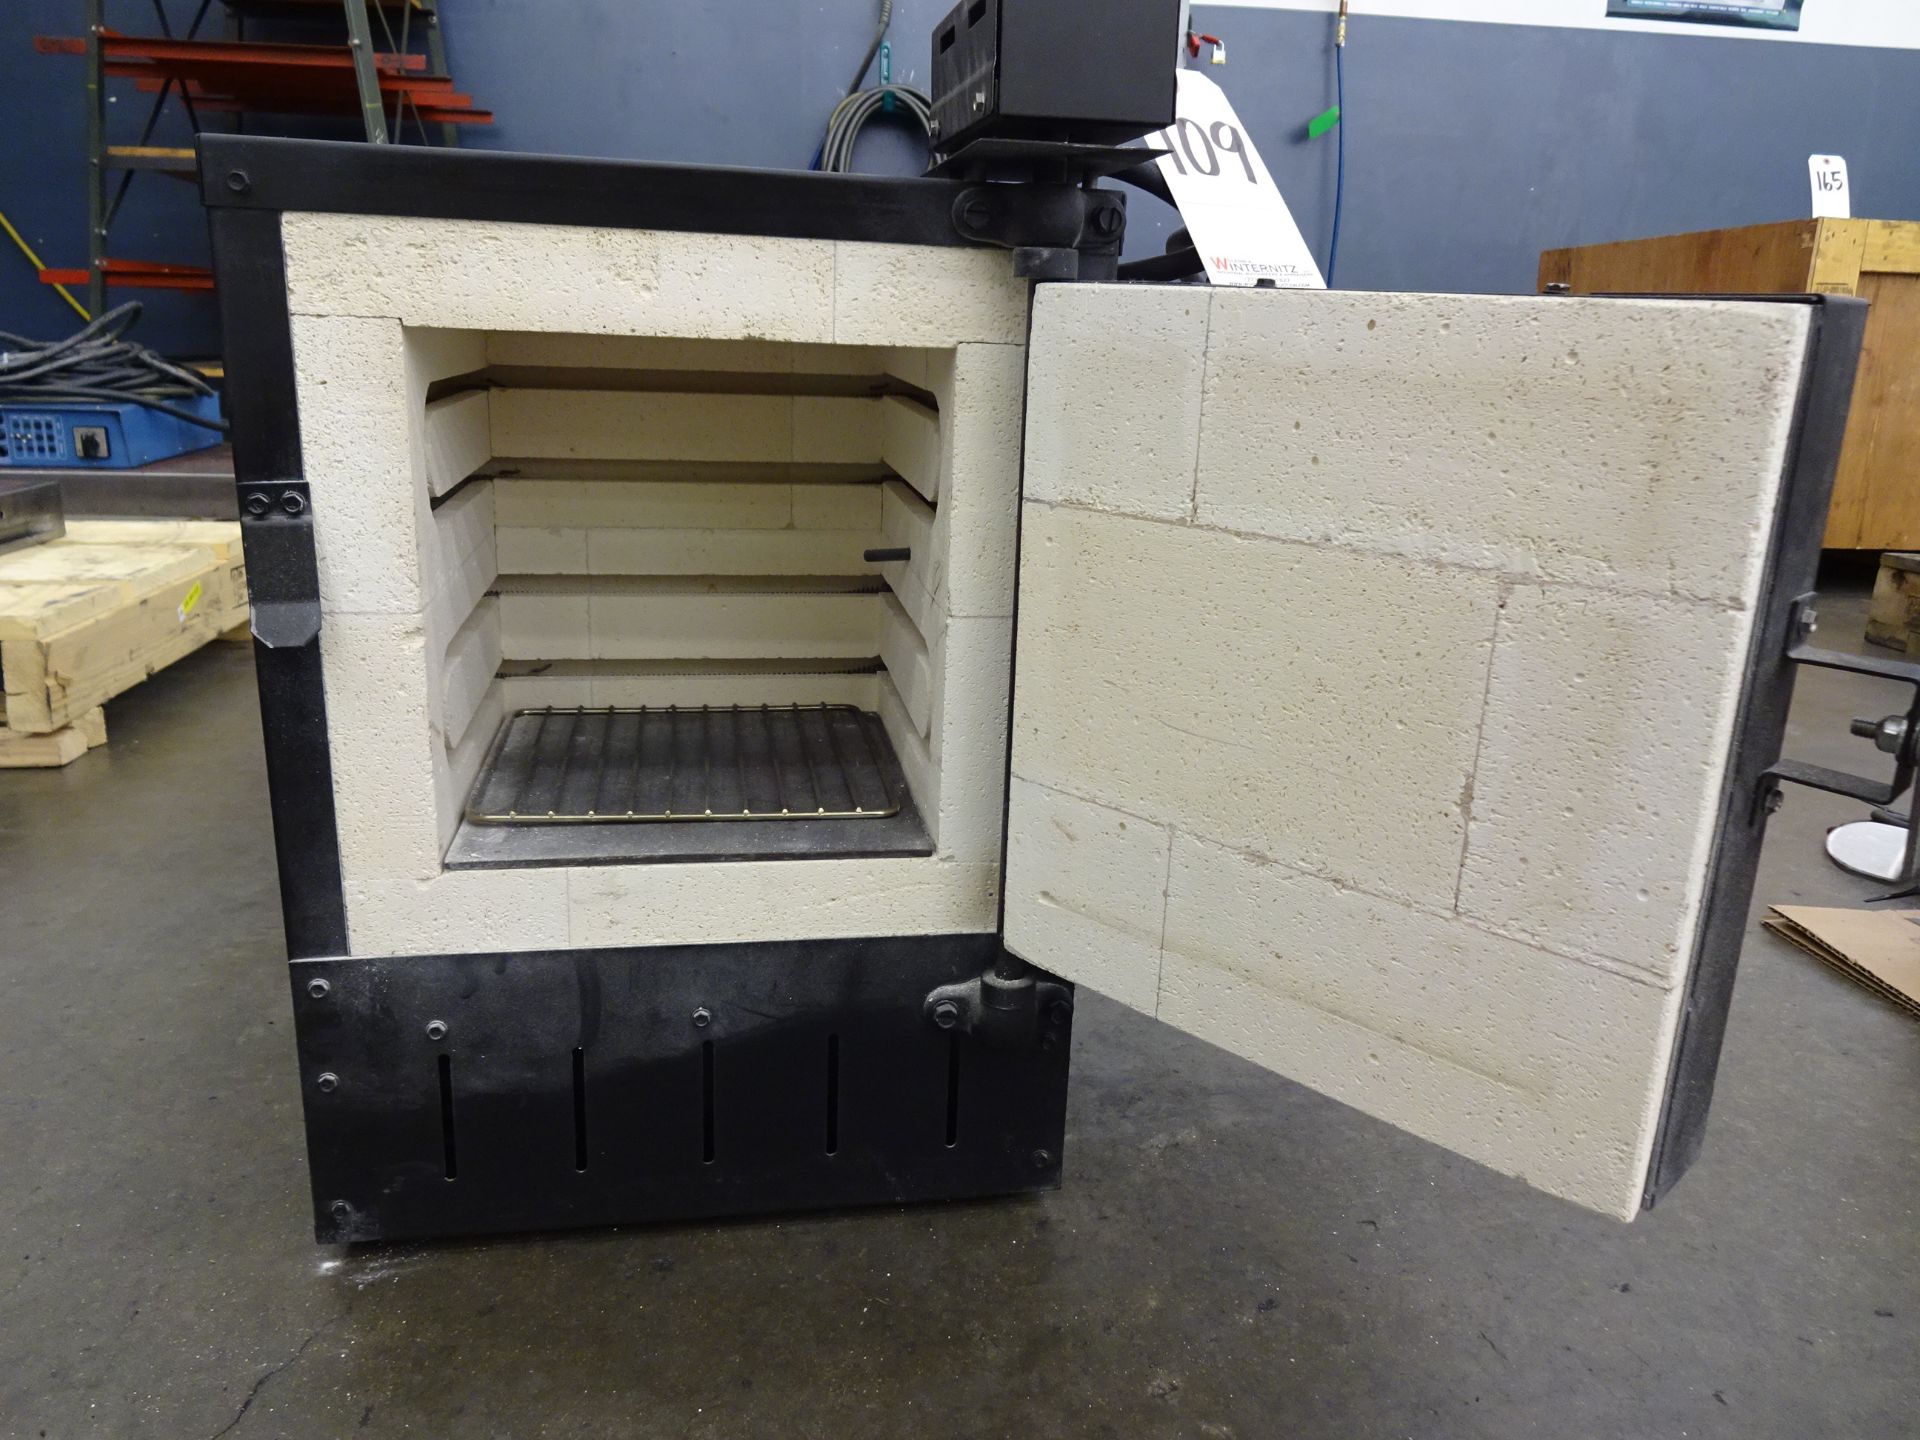 ORTON BENCH TOP FURNACE WITH SENTRY 2.0 MICROPROCESSOR CONTROLS, 8 X 8 X 8 (APPROX) CAP. - Image 2 of 2